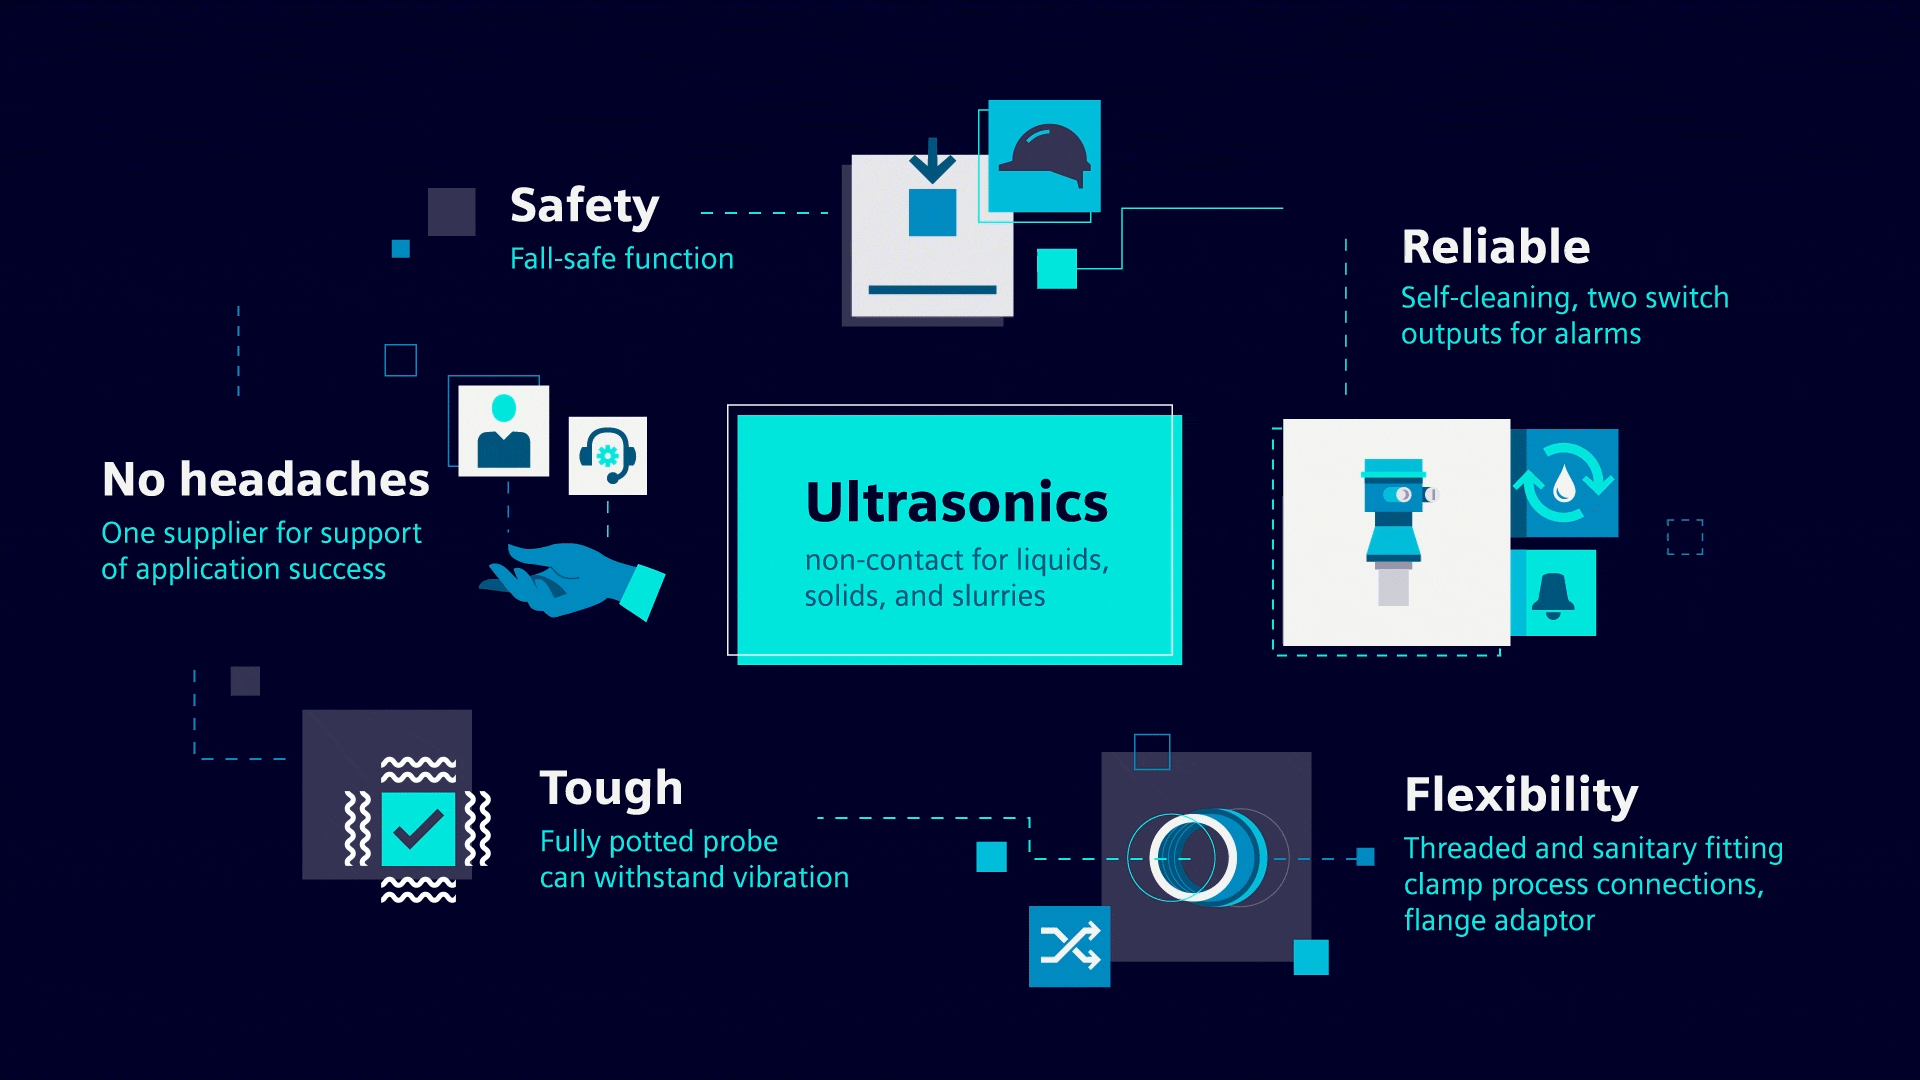 USA | Ultrasonic level animated infographic showing reliable, flexible features